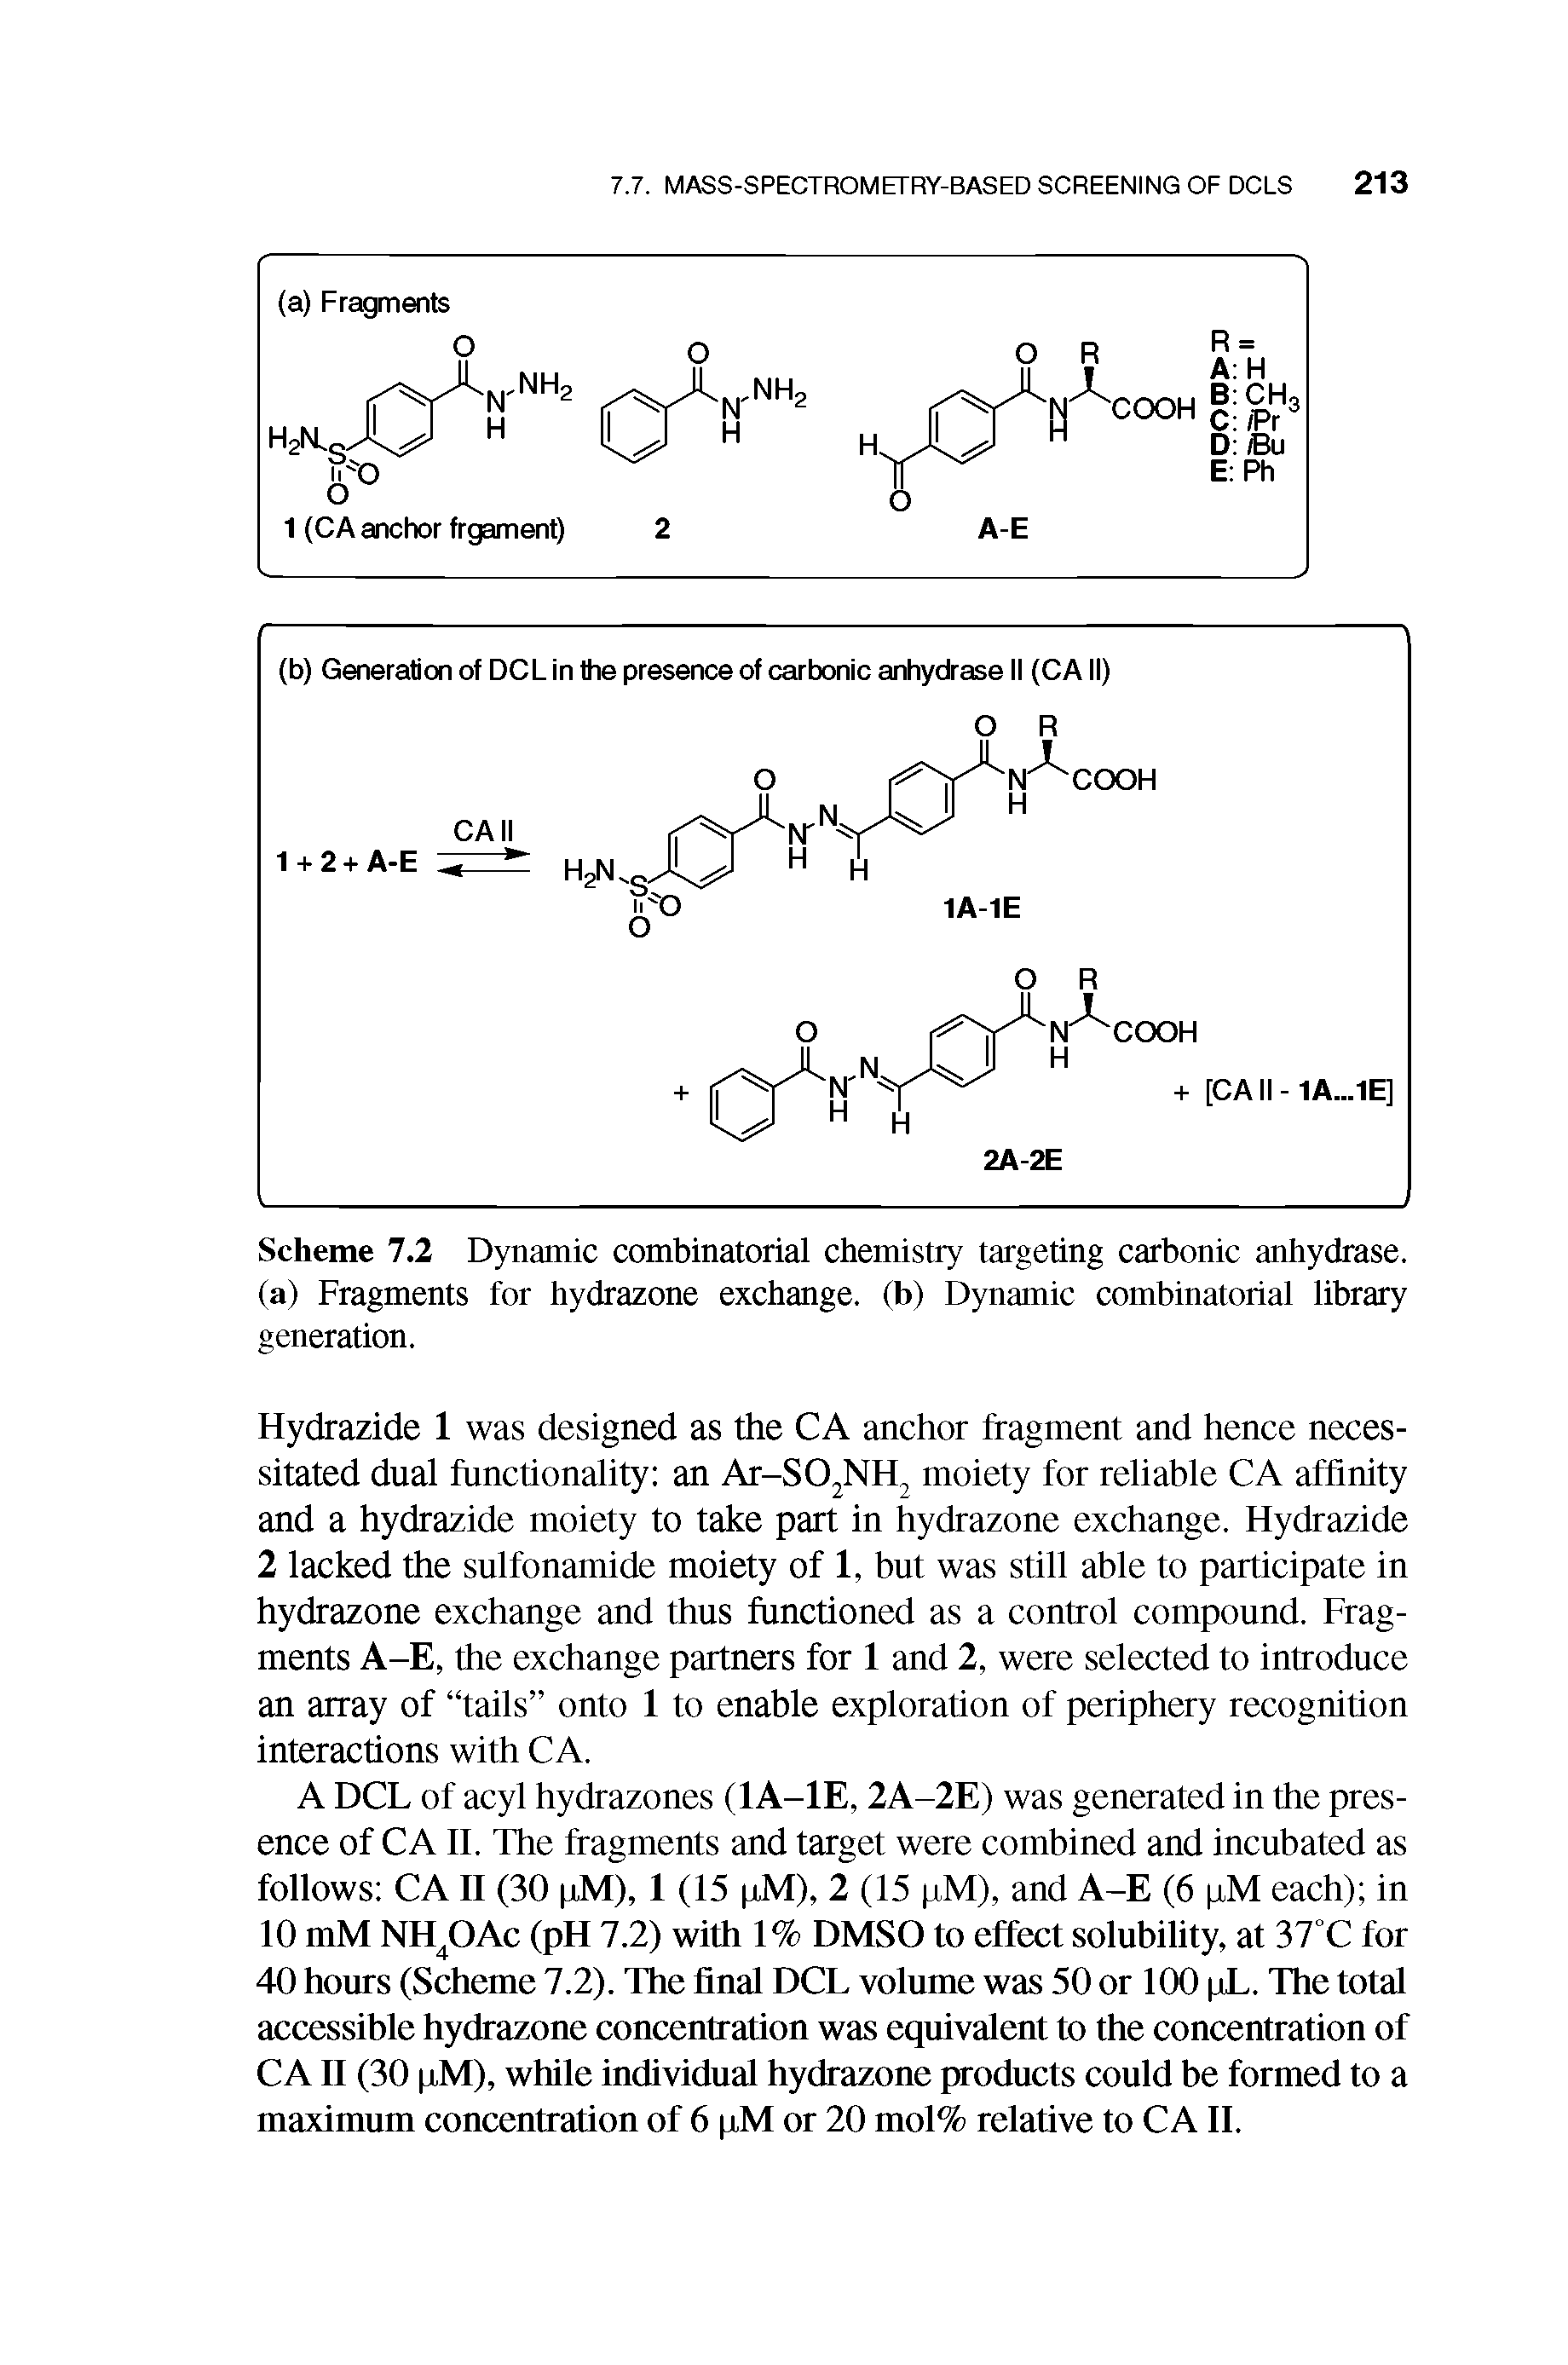 Scheme 7.2 Dynamic combinatorial chemistry targeting carbonic anhydrase. (a) Fragments for hydrazone exchange, (b) Dynamic combinatorial library generation.